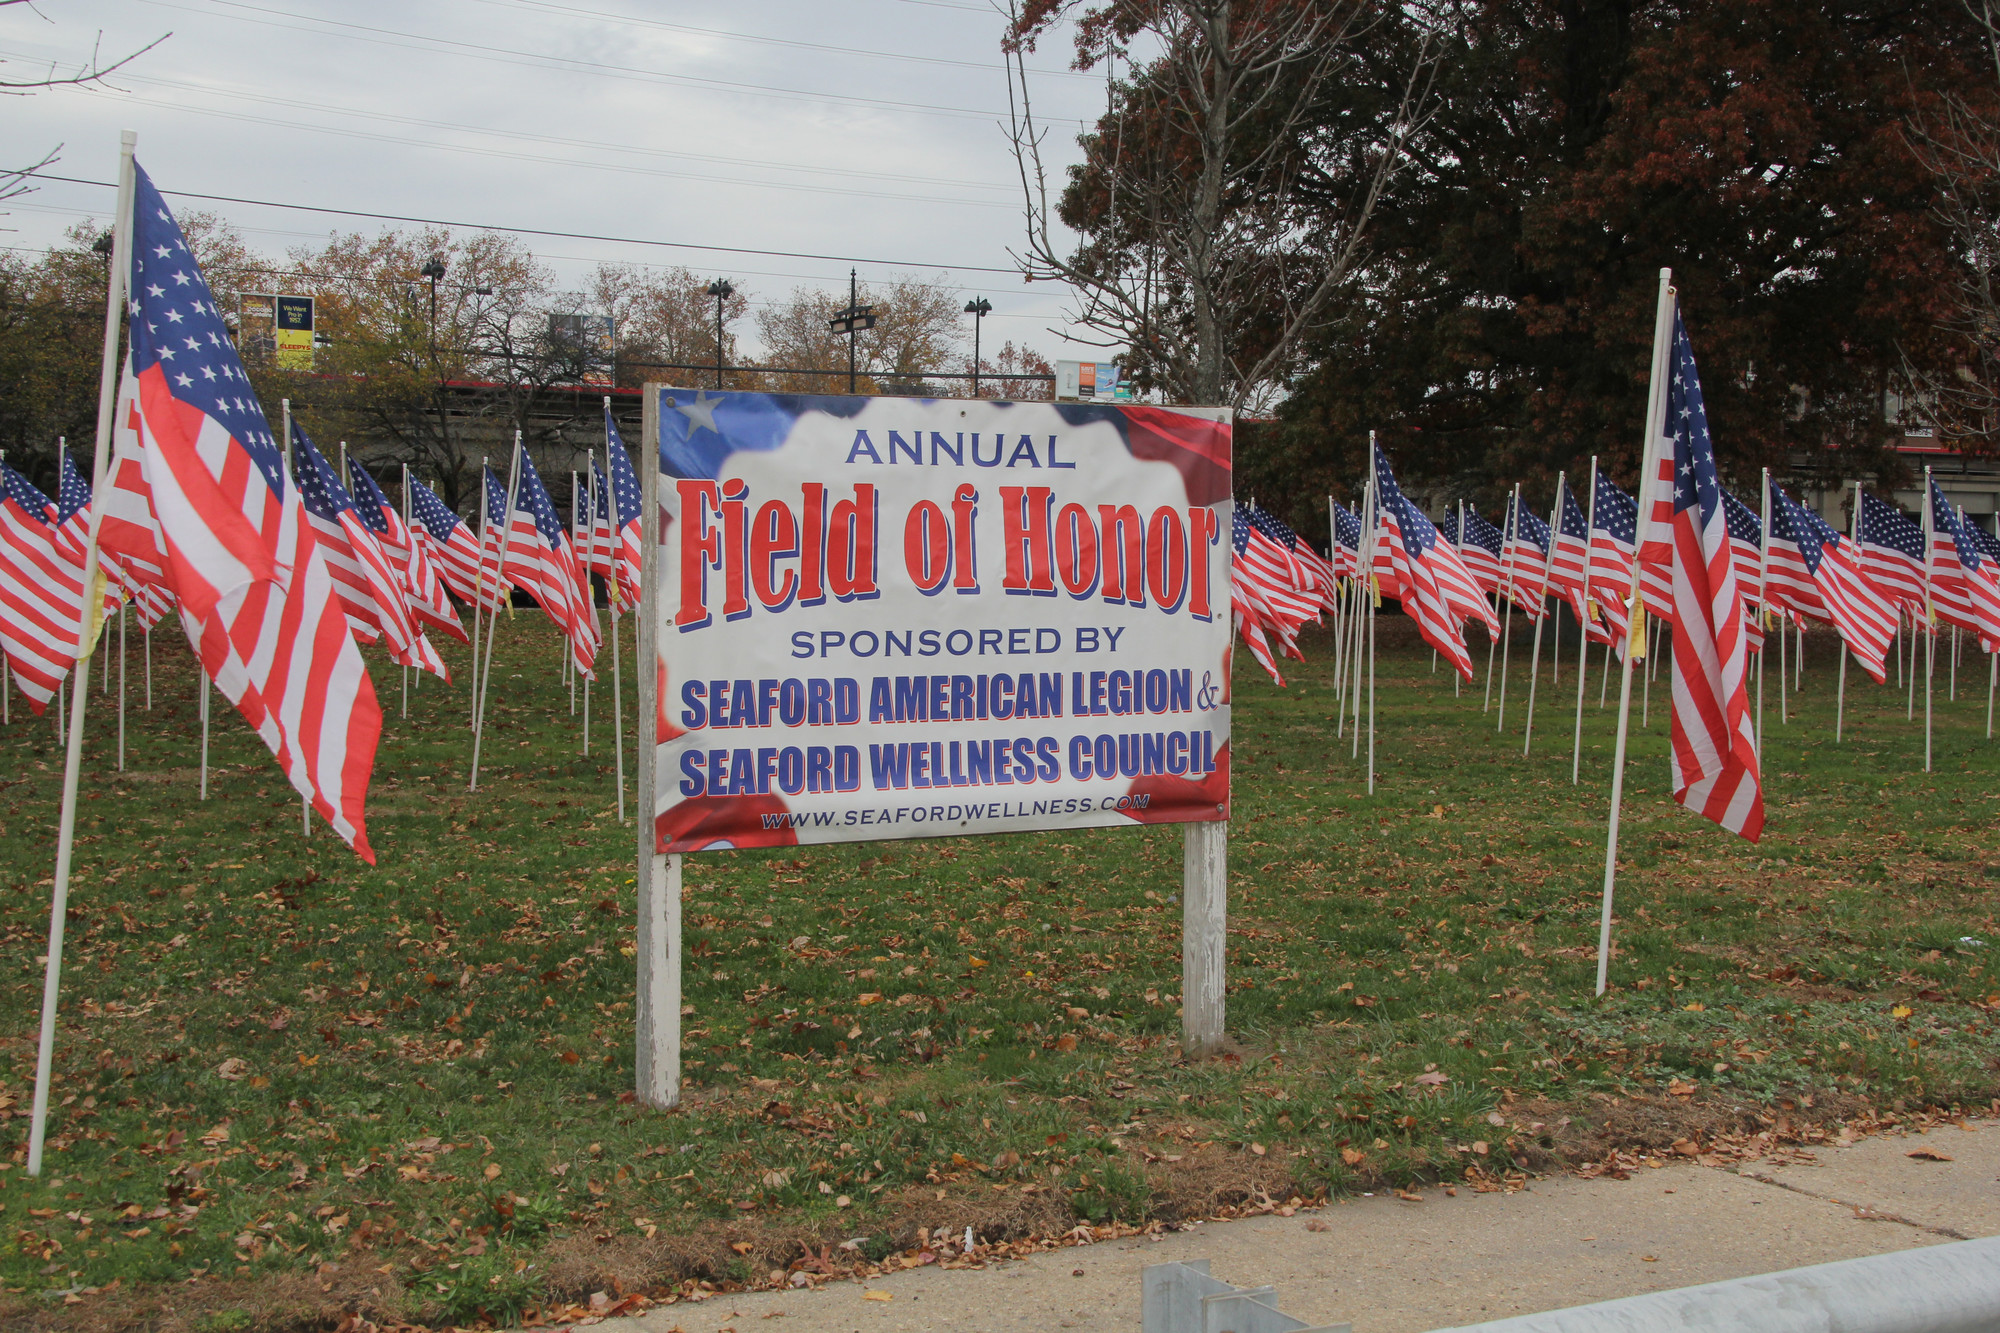 Seaford’s 2015 Field of Honor was a partnership between the American Legion and the Wellness Council.